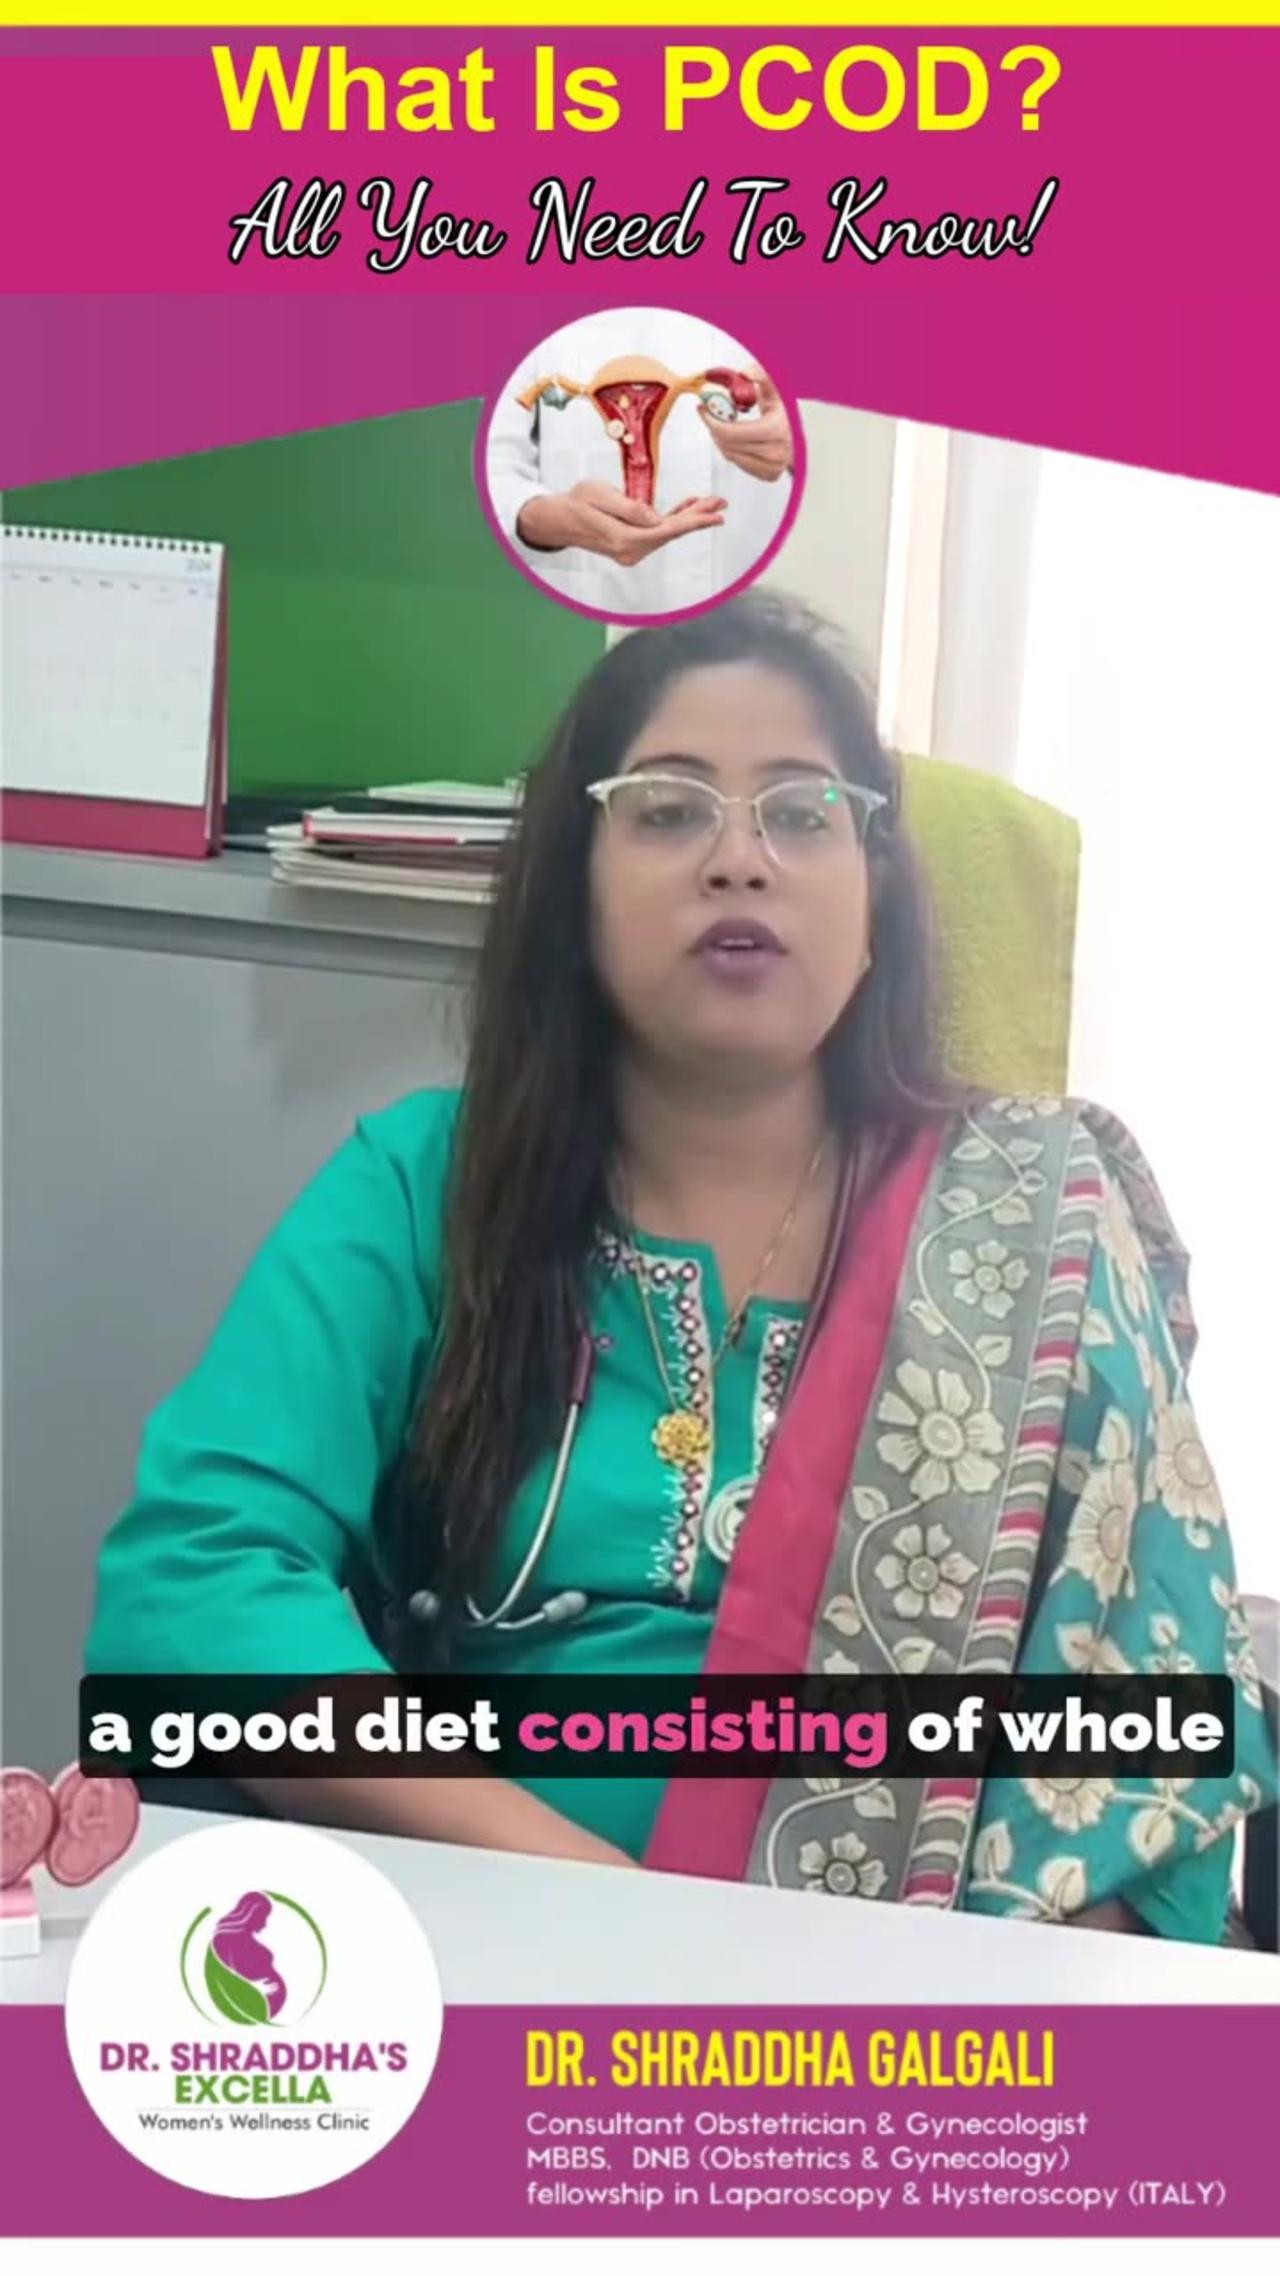 PCOD_ Causes & Treatments - Everything you should know about PCOD_PCOS - Dr. Shraddha Galgali